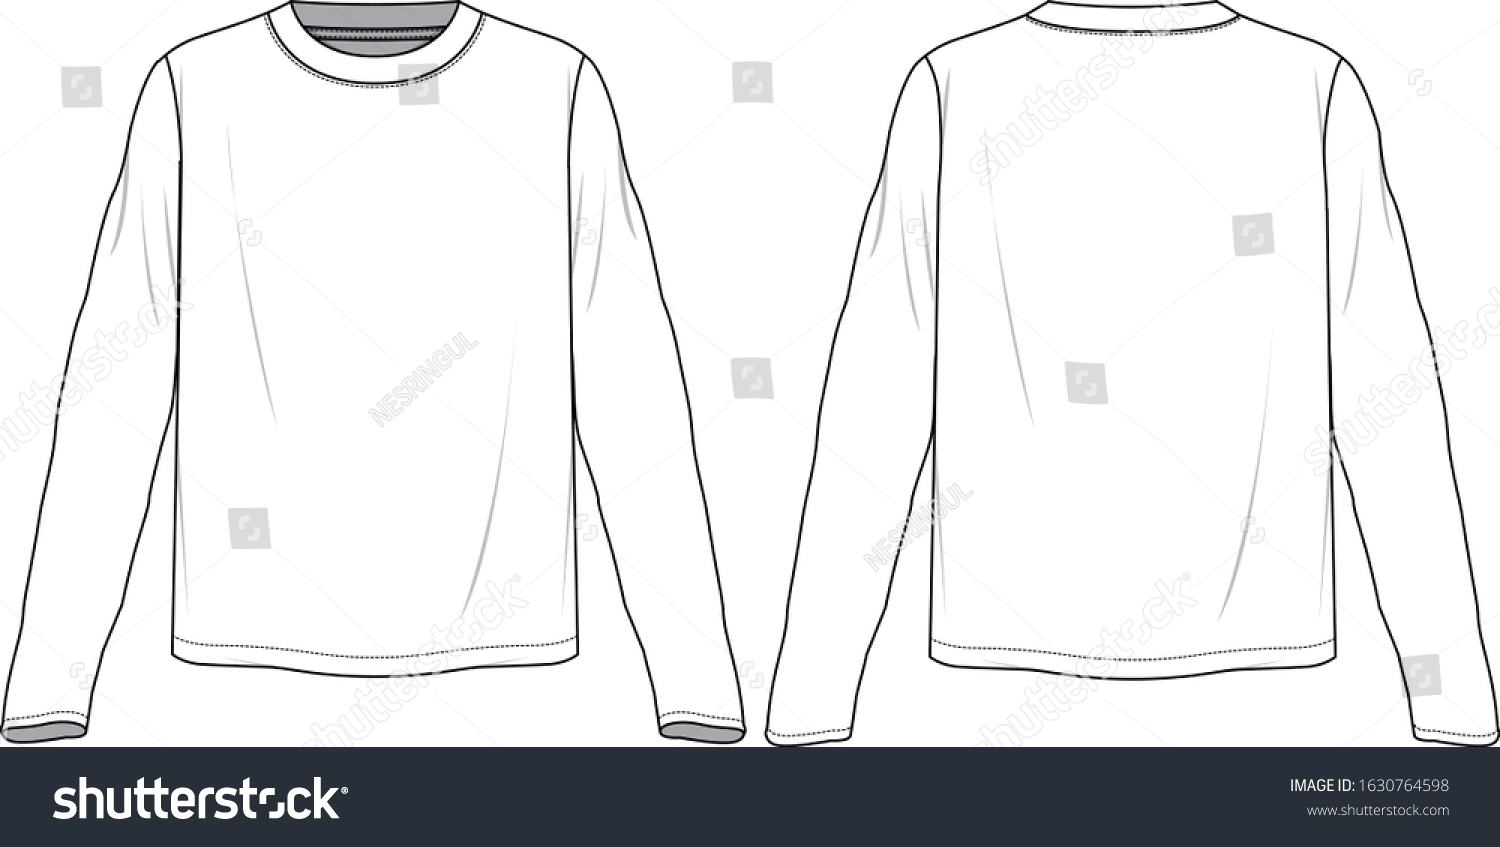 Tshirt Round Neck Mockup Template Stock Vector (Royalty Free ...